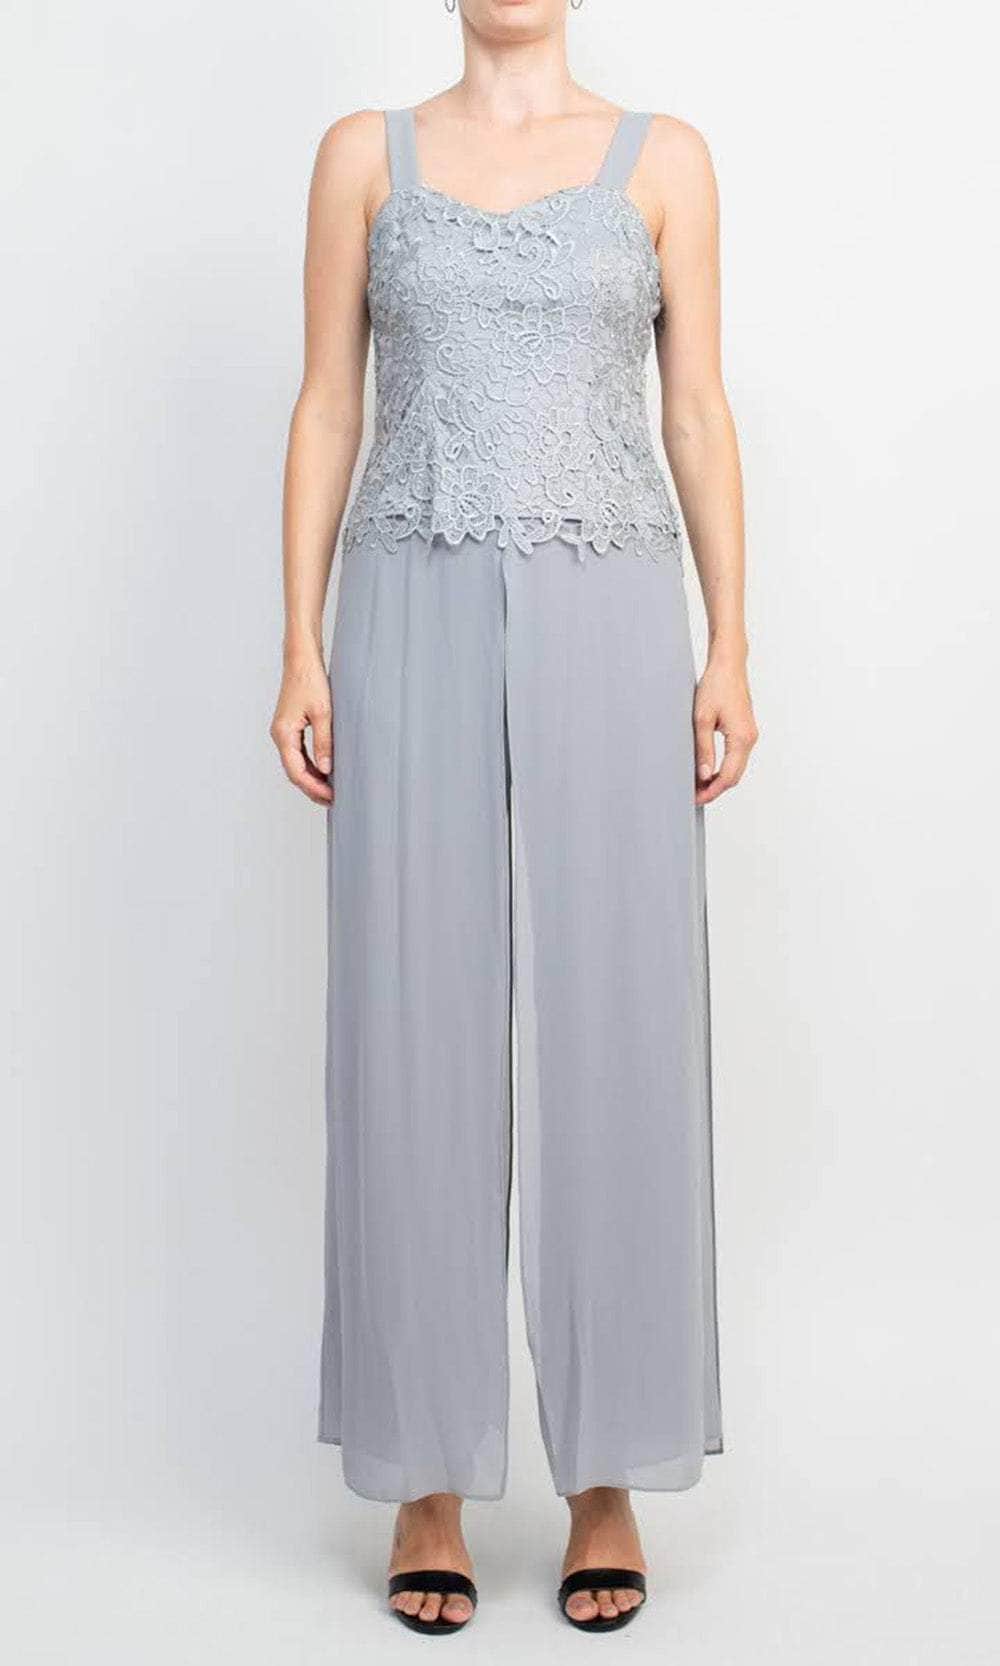 Classic Lace Jumpsuit Asymmetirc See through Overskirt White